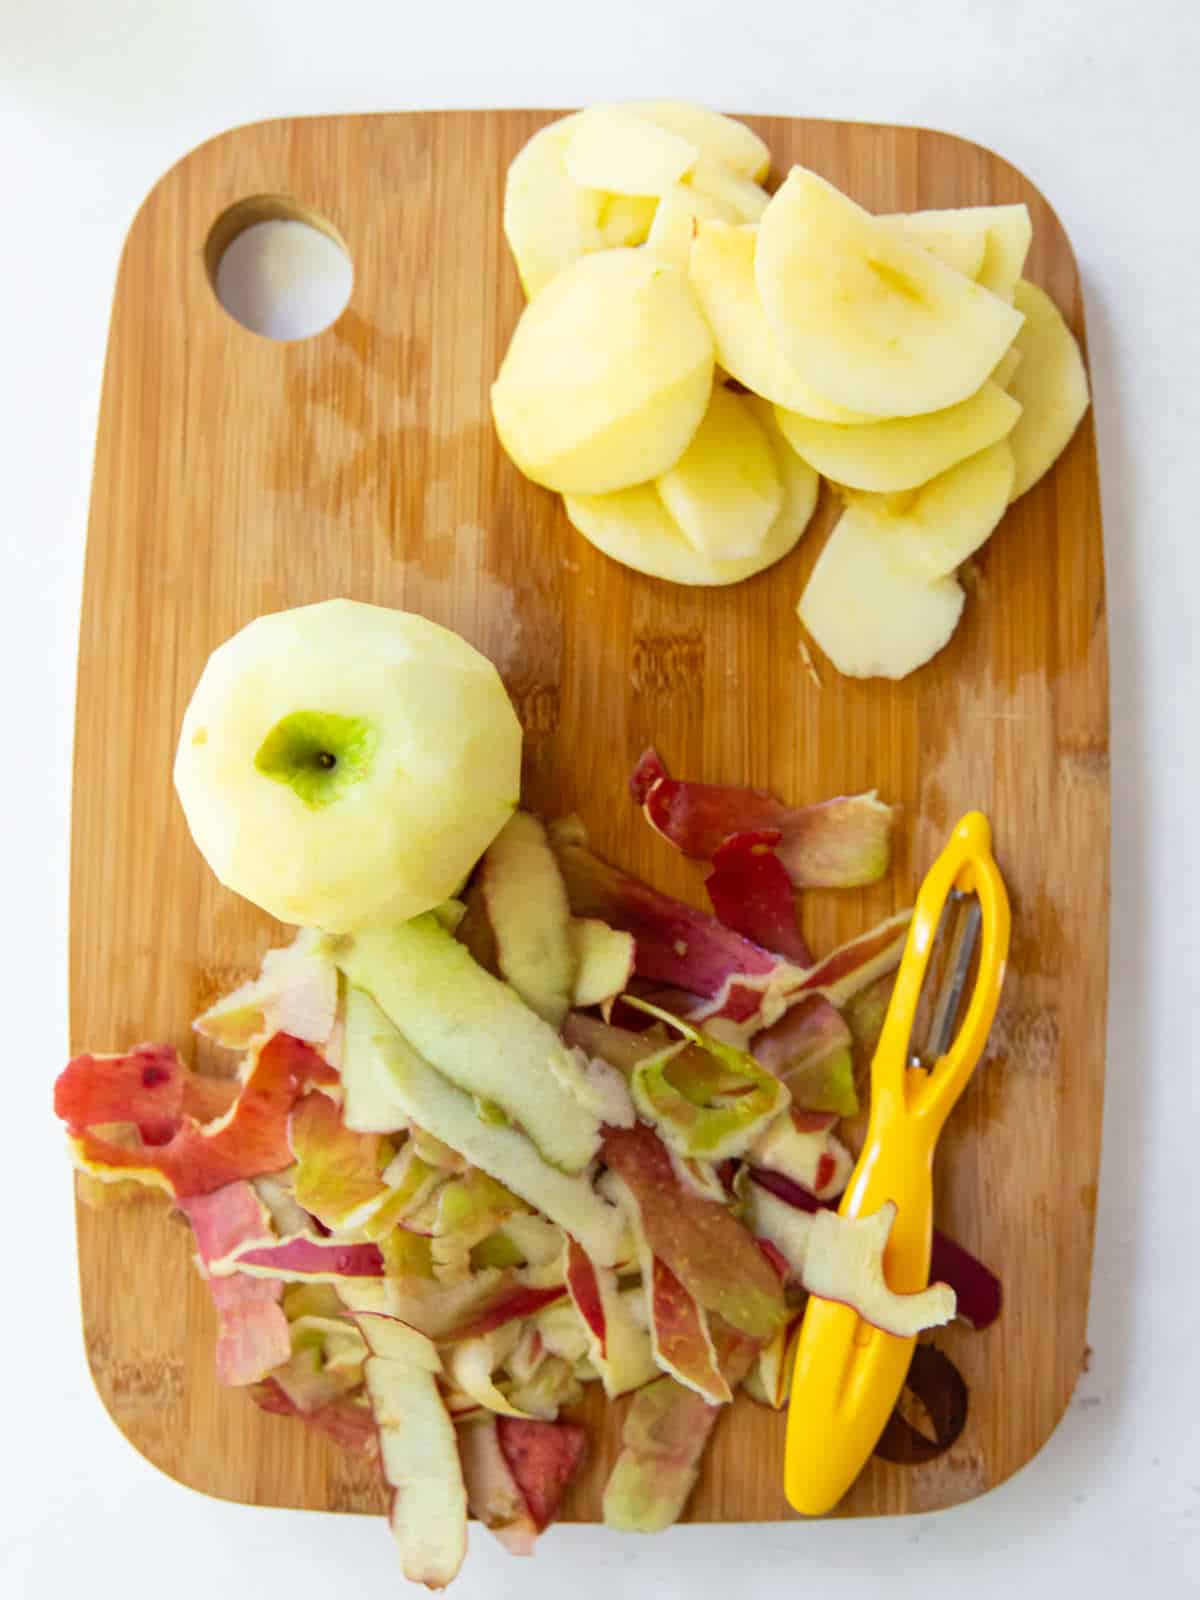 peeled, cored, and chunked apples on a wooden cutting board.